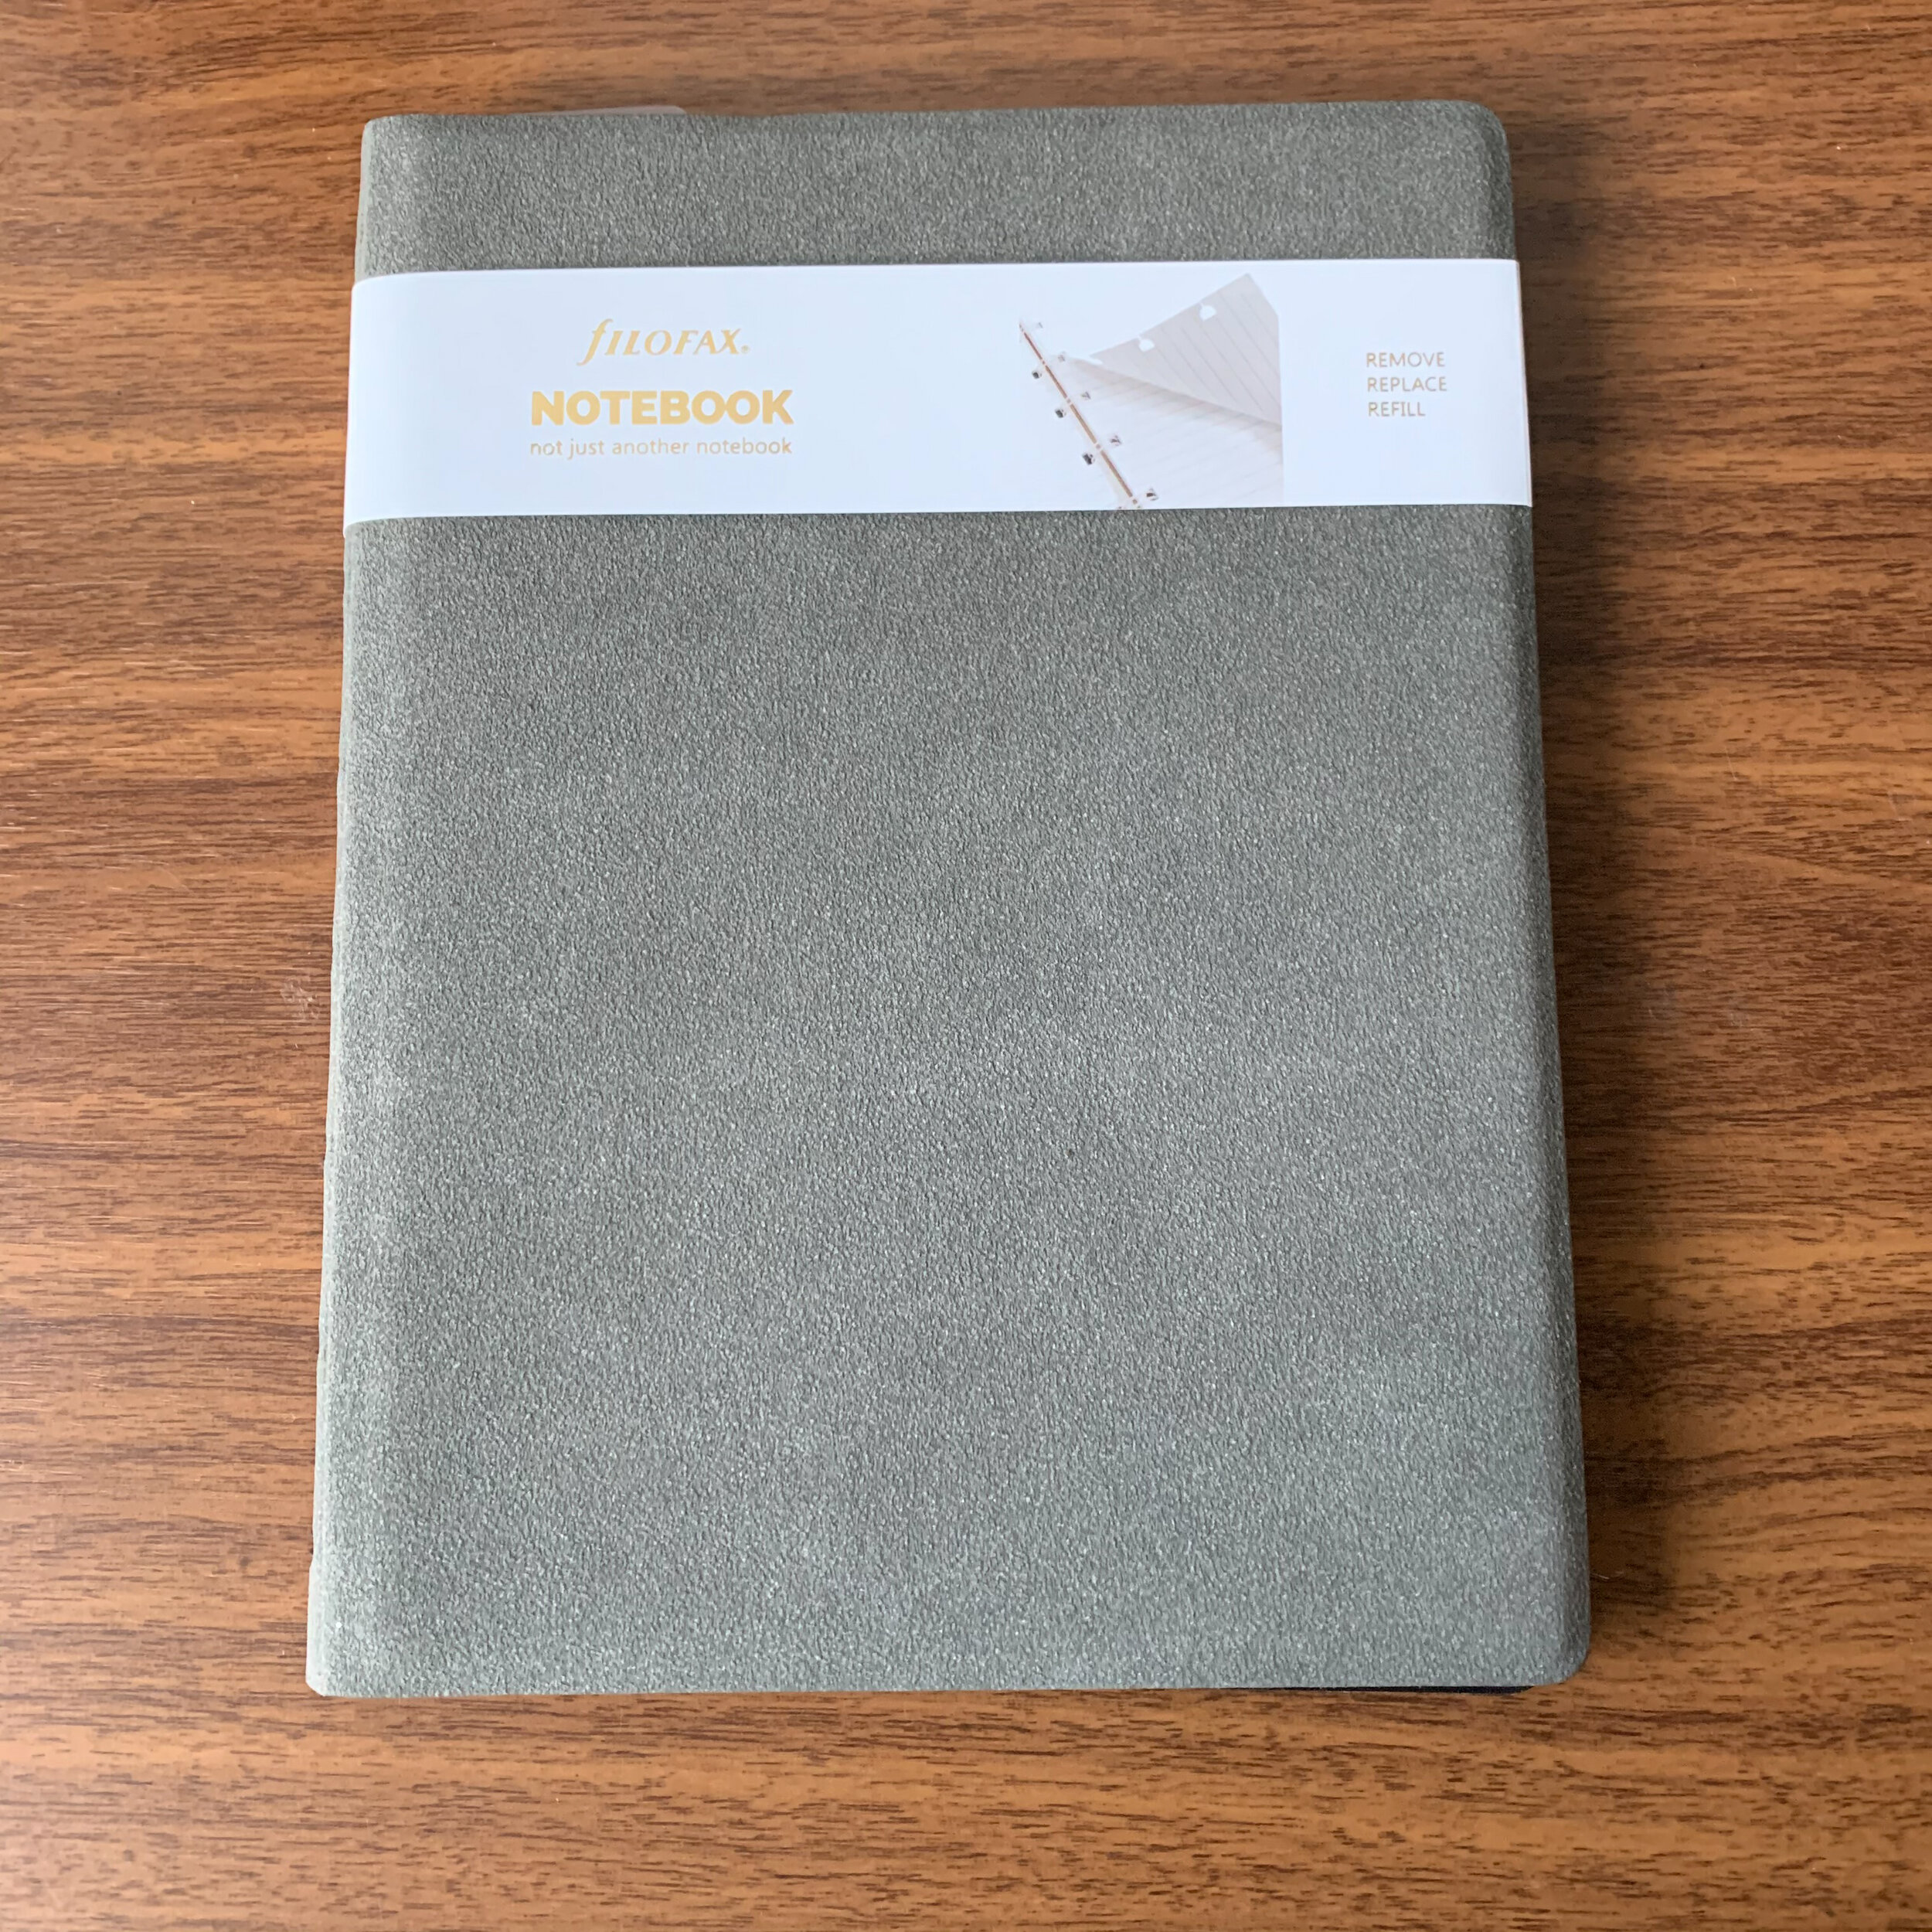 Notebook Review: Filofax Notebook and Clipbook — The Gentleman Stationer